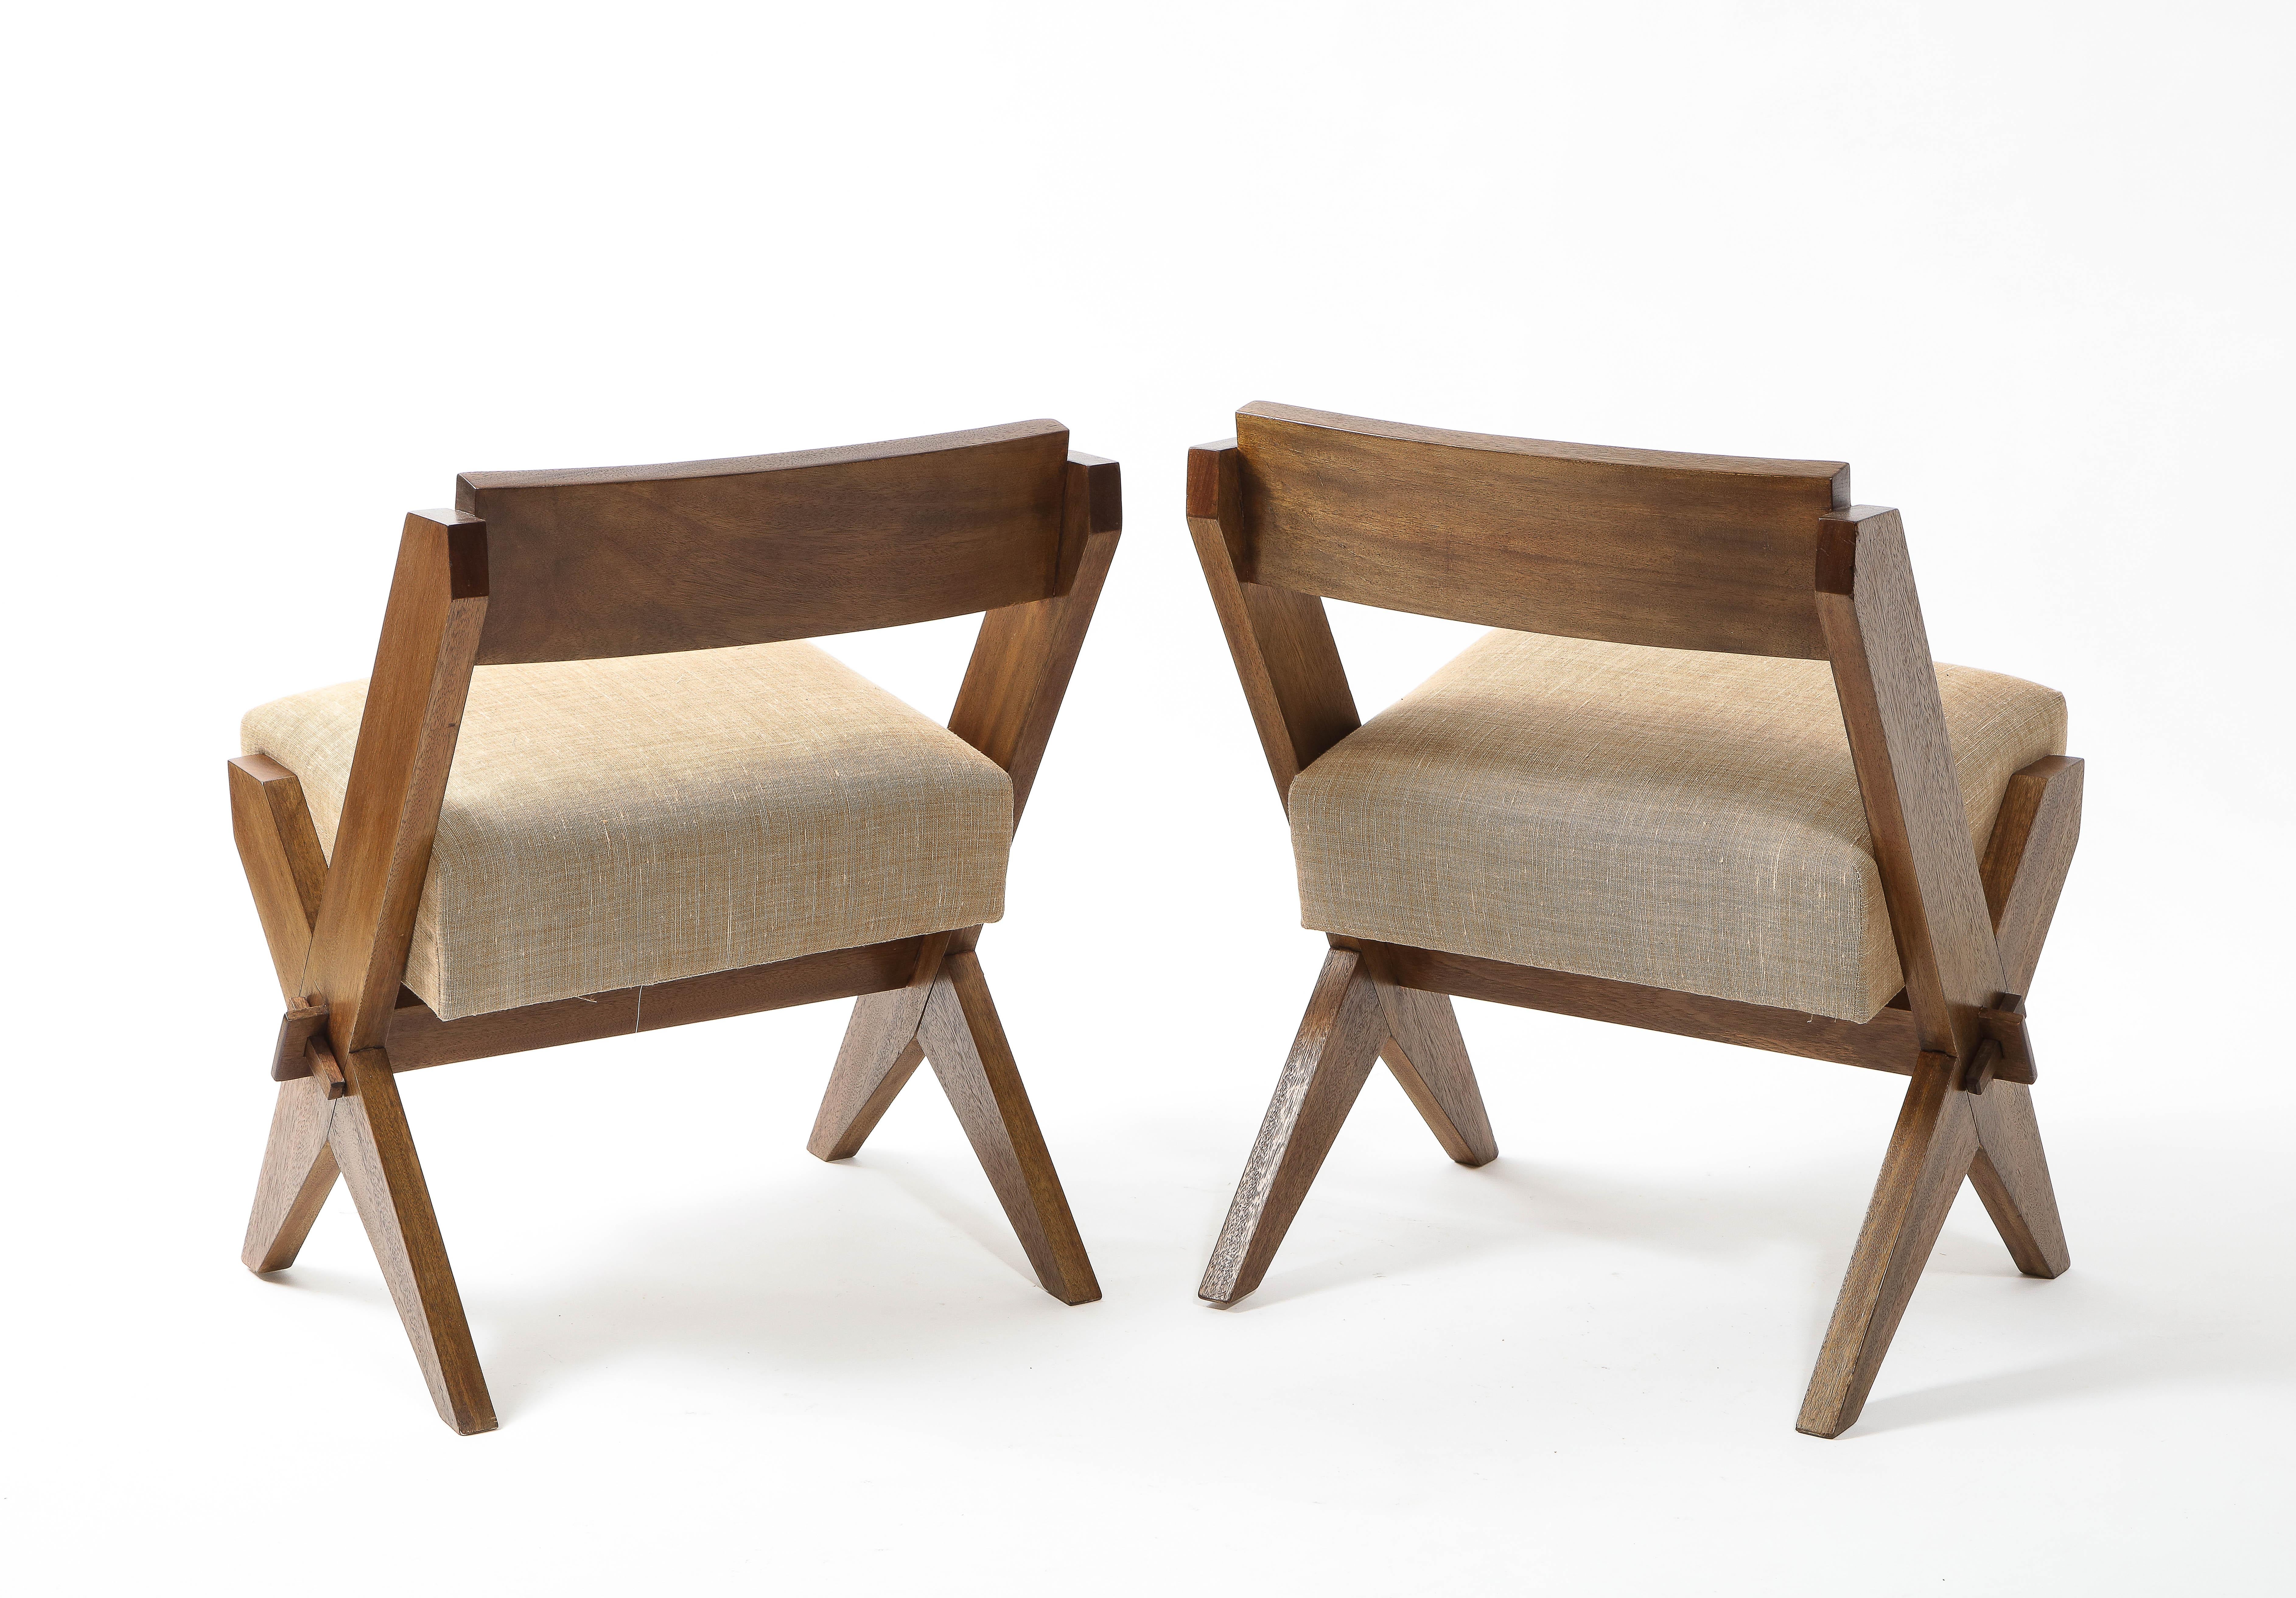 Pair of Reconstruction Small Solid Wood Scissor Leg Chairs, France 1950's For Sale 3